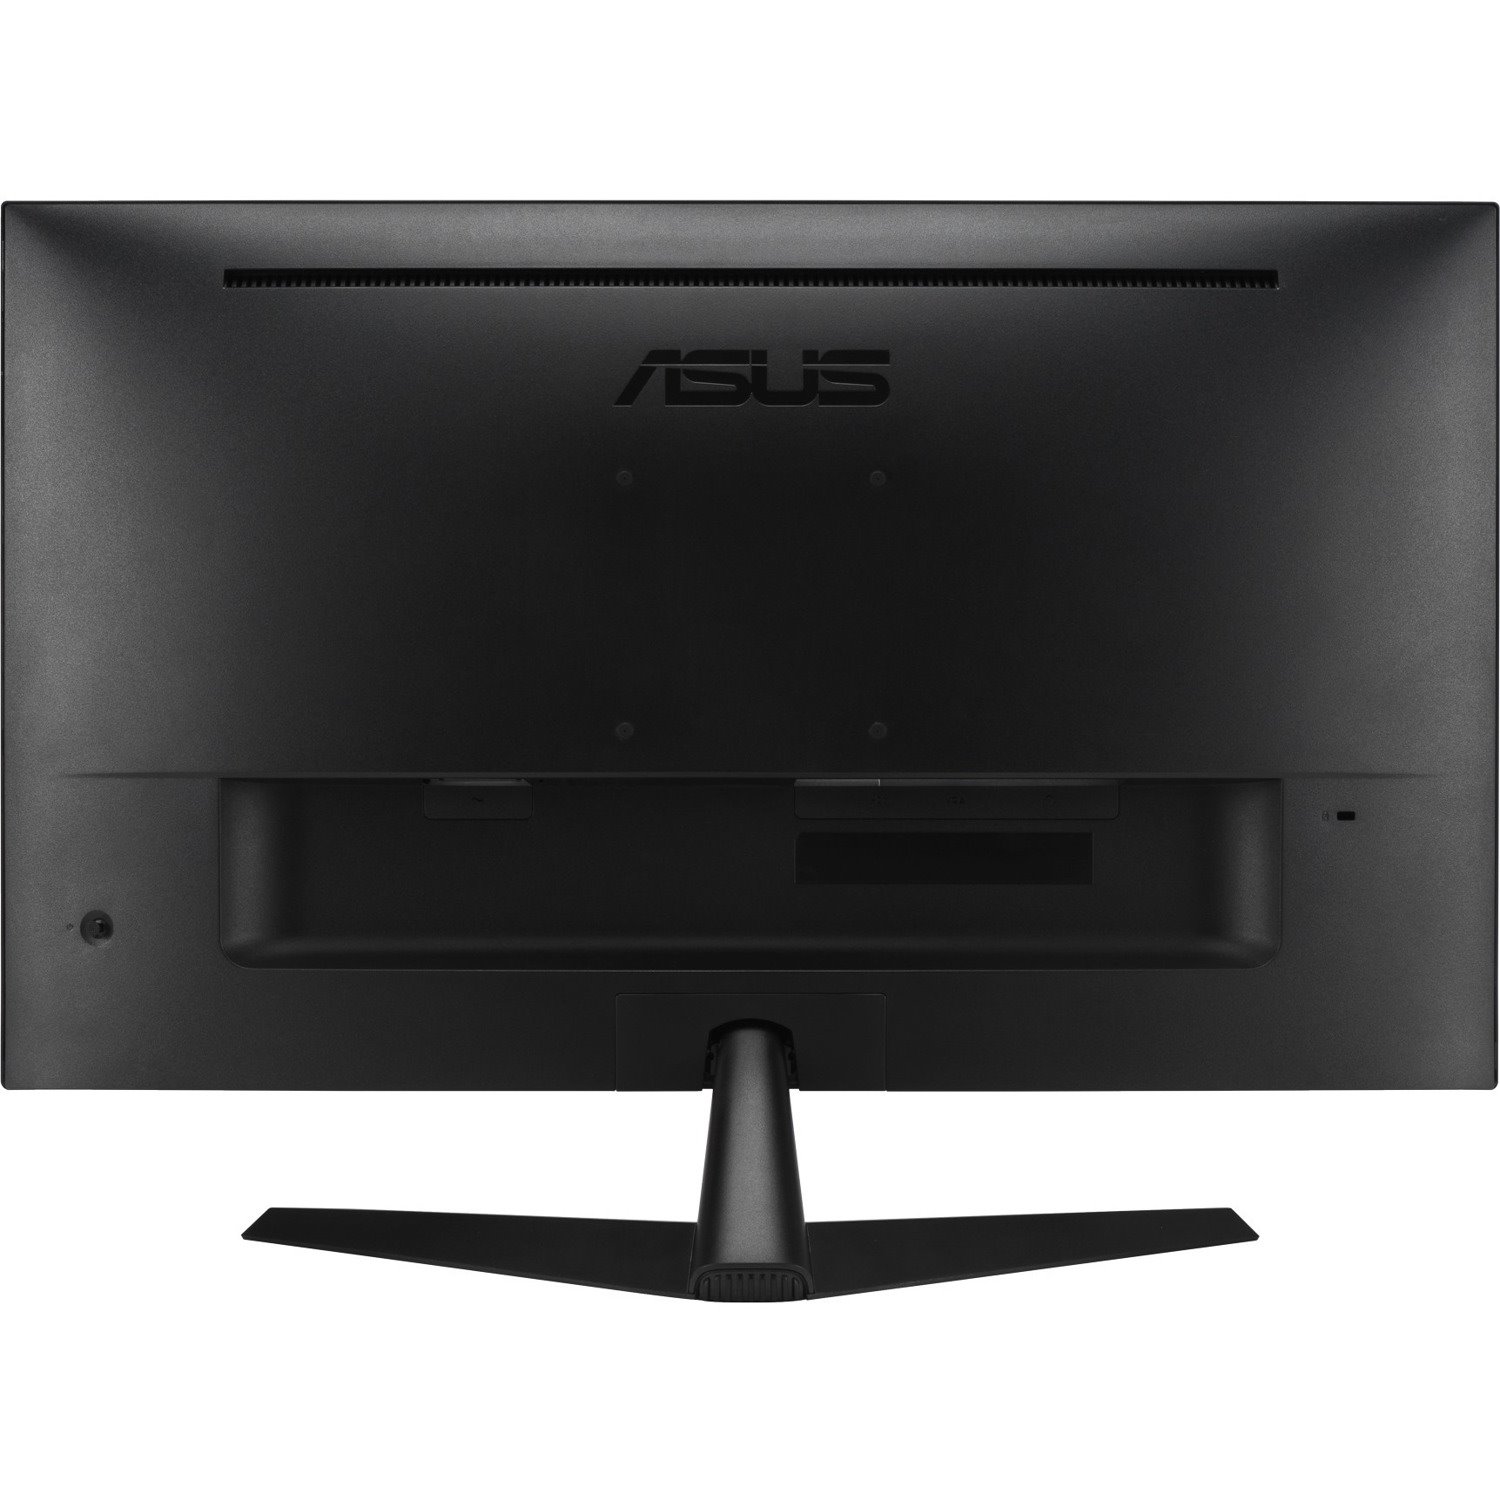 Asus VY279HE 68.6 cm (27") Full HD LED Gaming LCD Monitor - 16:9 - Black